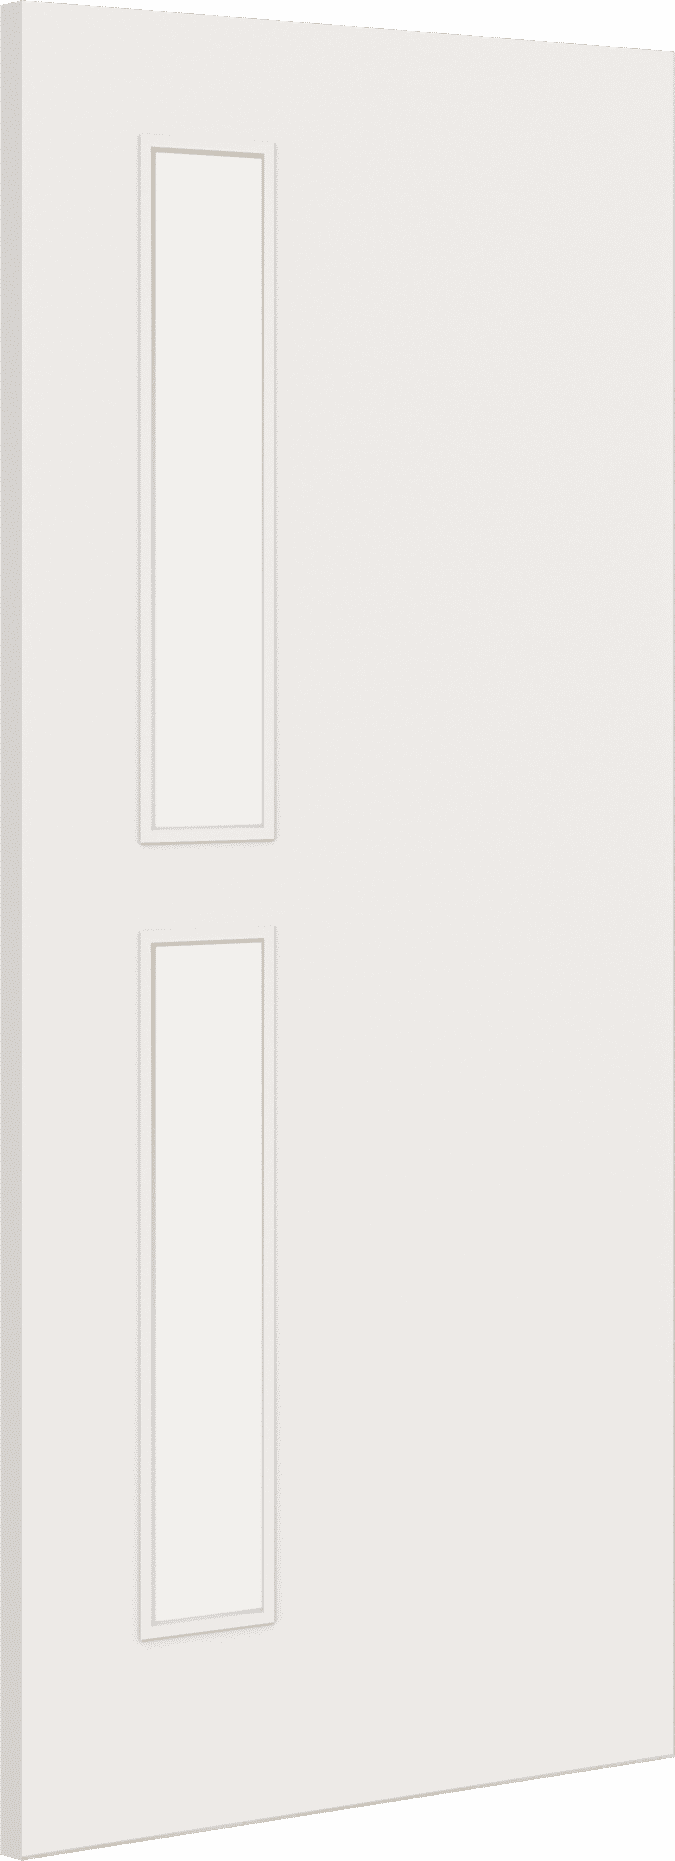 1981mm x 533mm x 44mm (21") Architectural Paint Grade White 07 Clear Glazed Fire Door Blank